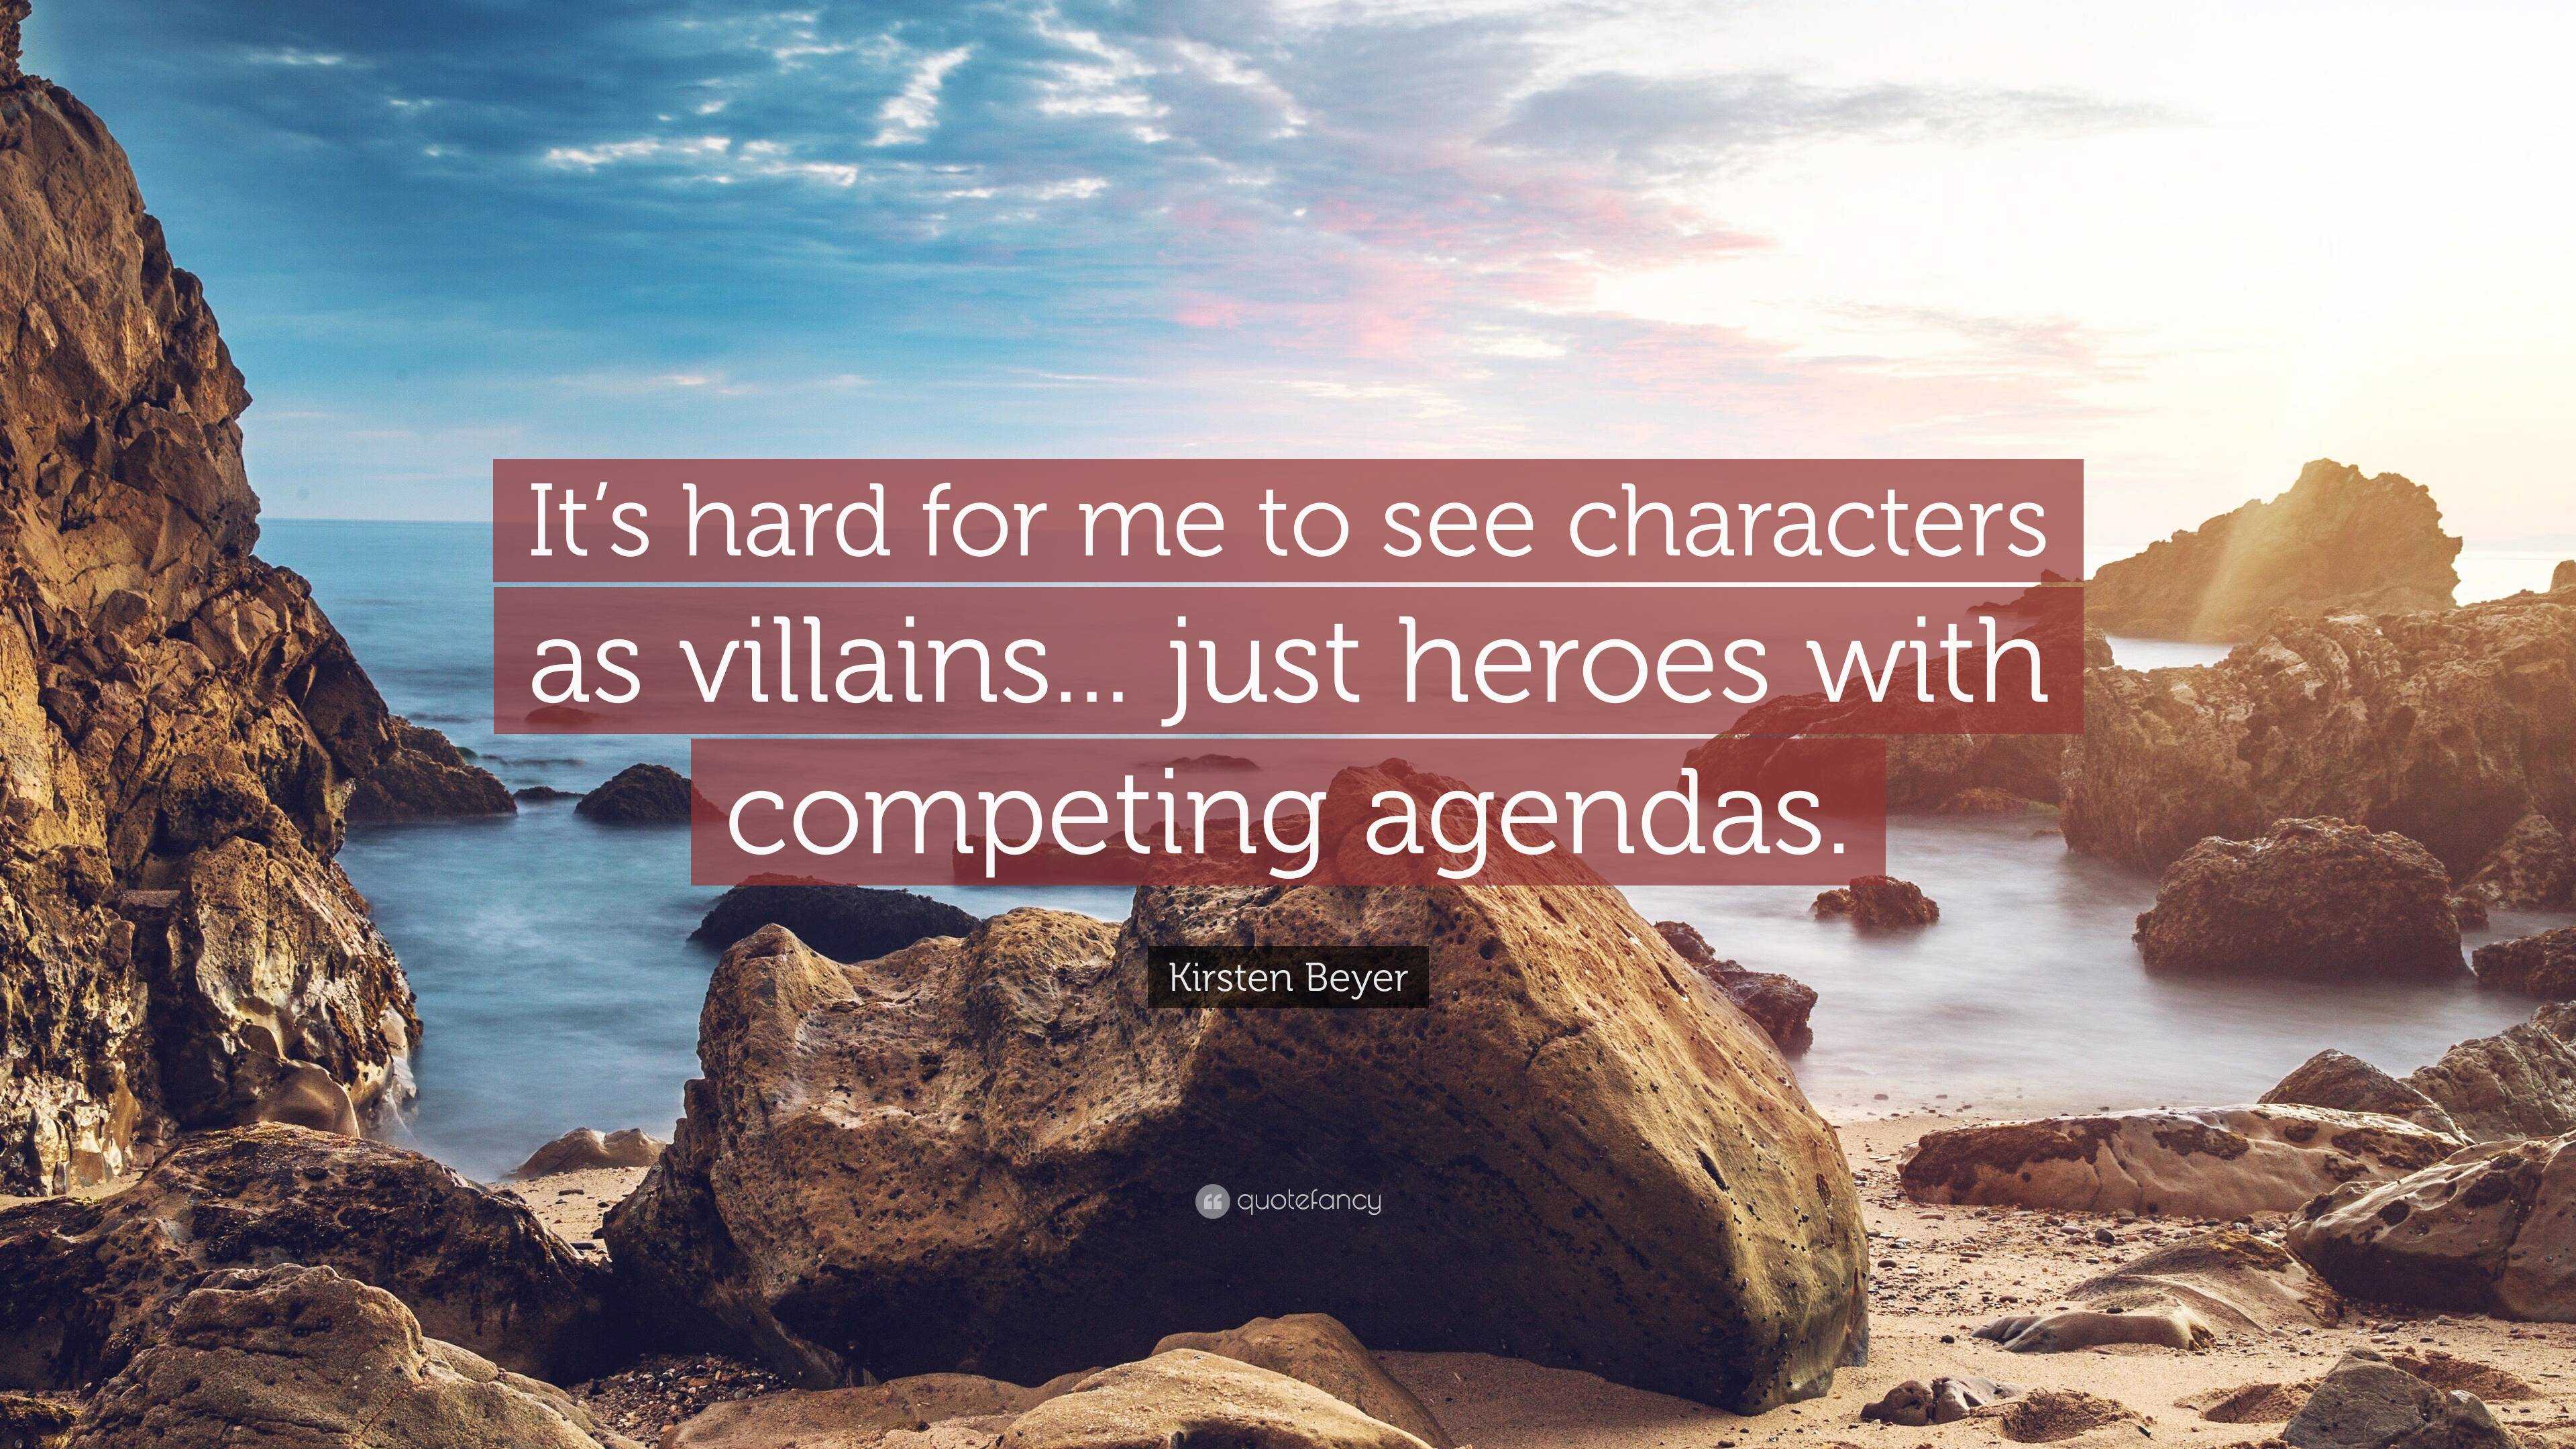 Kirsten Beyer Quote: “It’s hard for me to see characters as villains ...